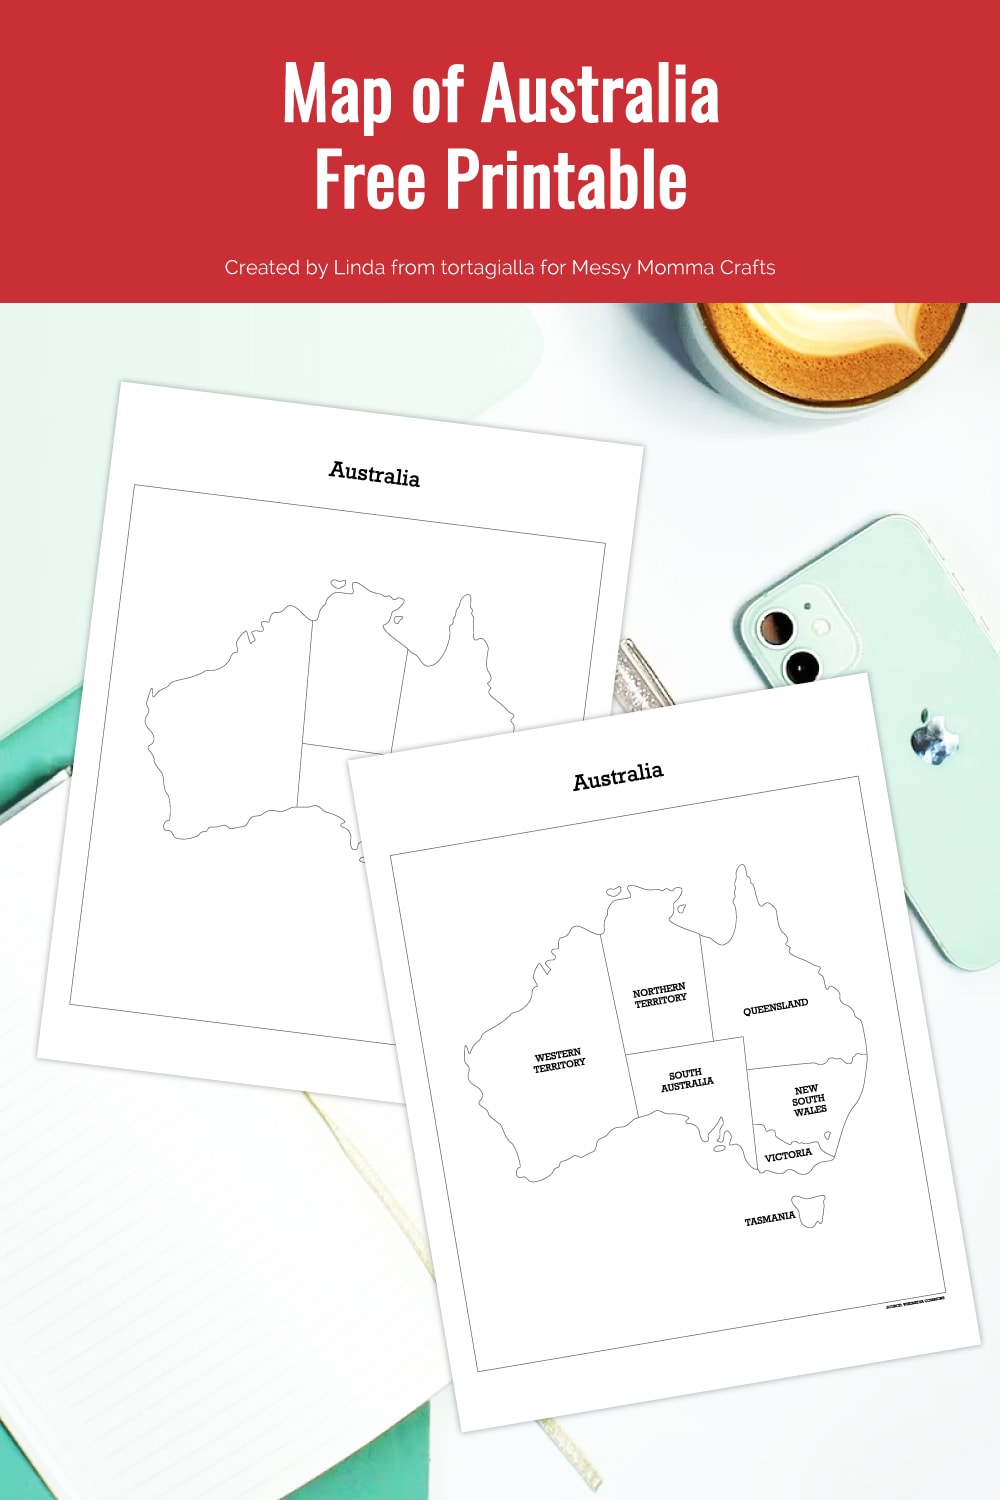 Preview of map of Australia printable pages on top of white desk with mint colored phone, notebooks and pen underneath plus view of cup of coffee on top edge.